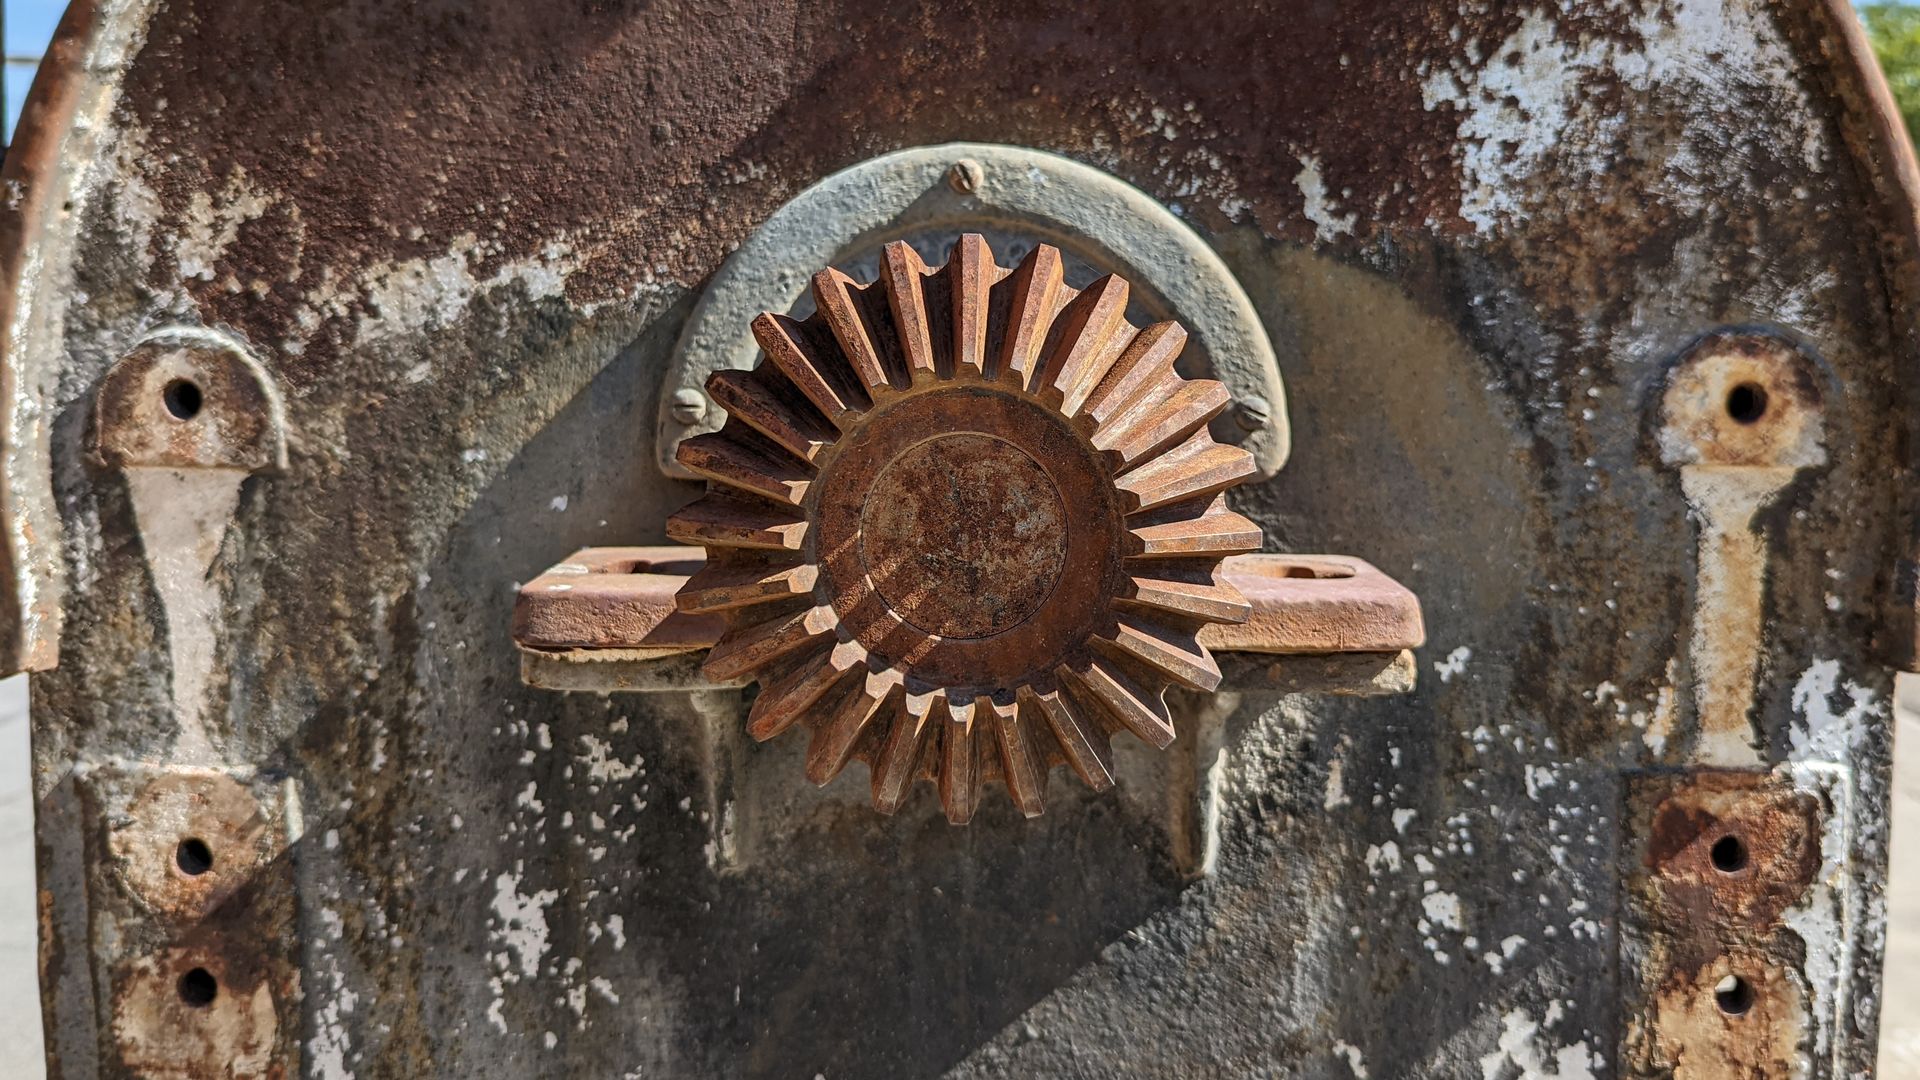 A rusty dial on a metal panel on an old machine.